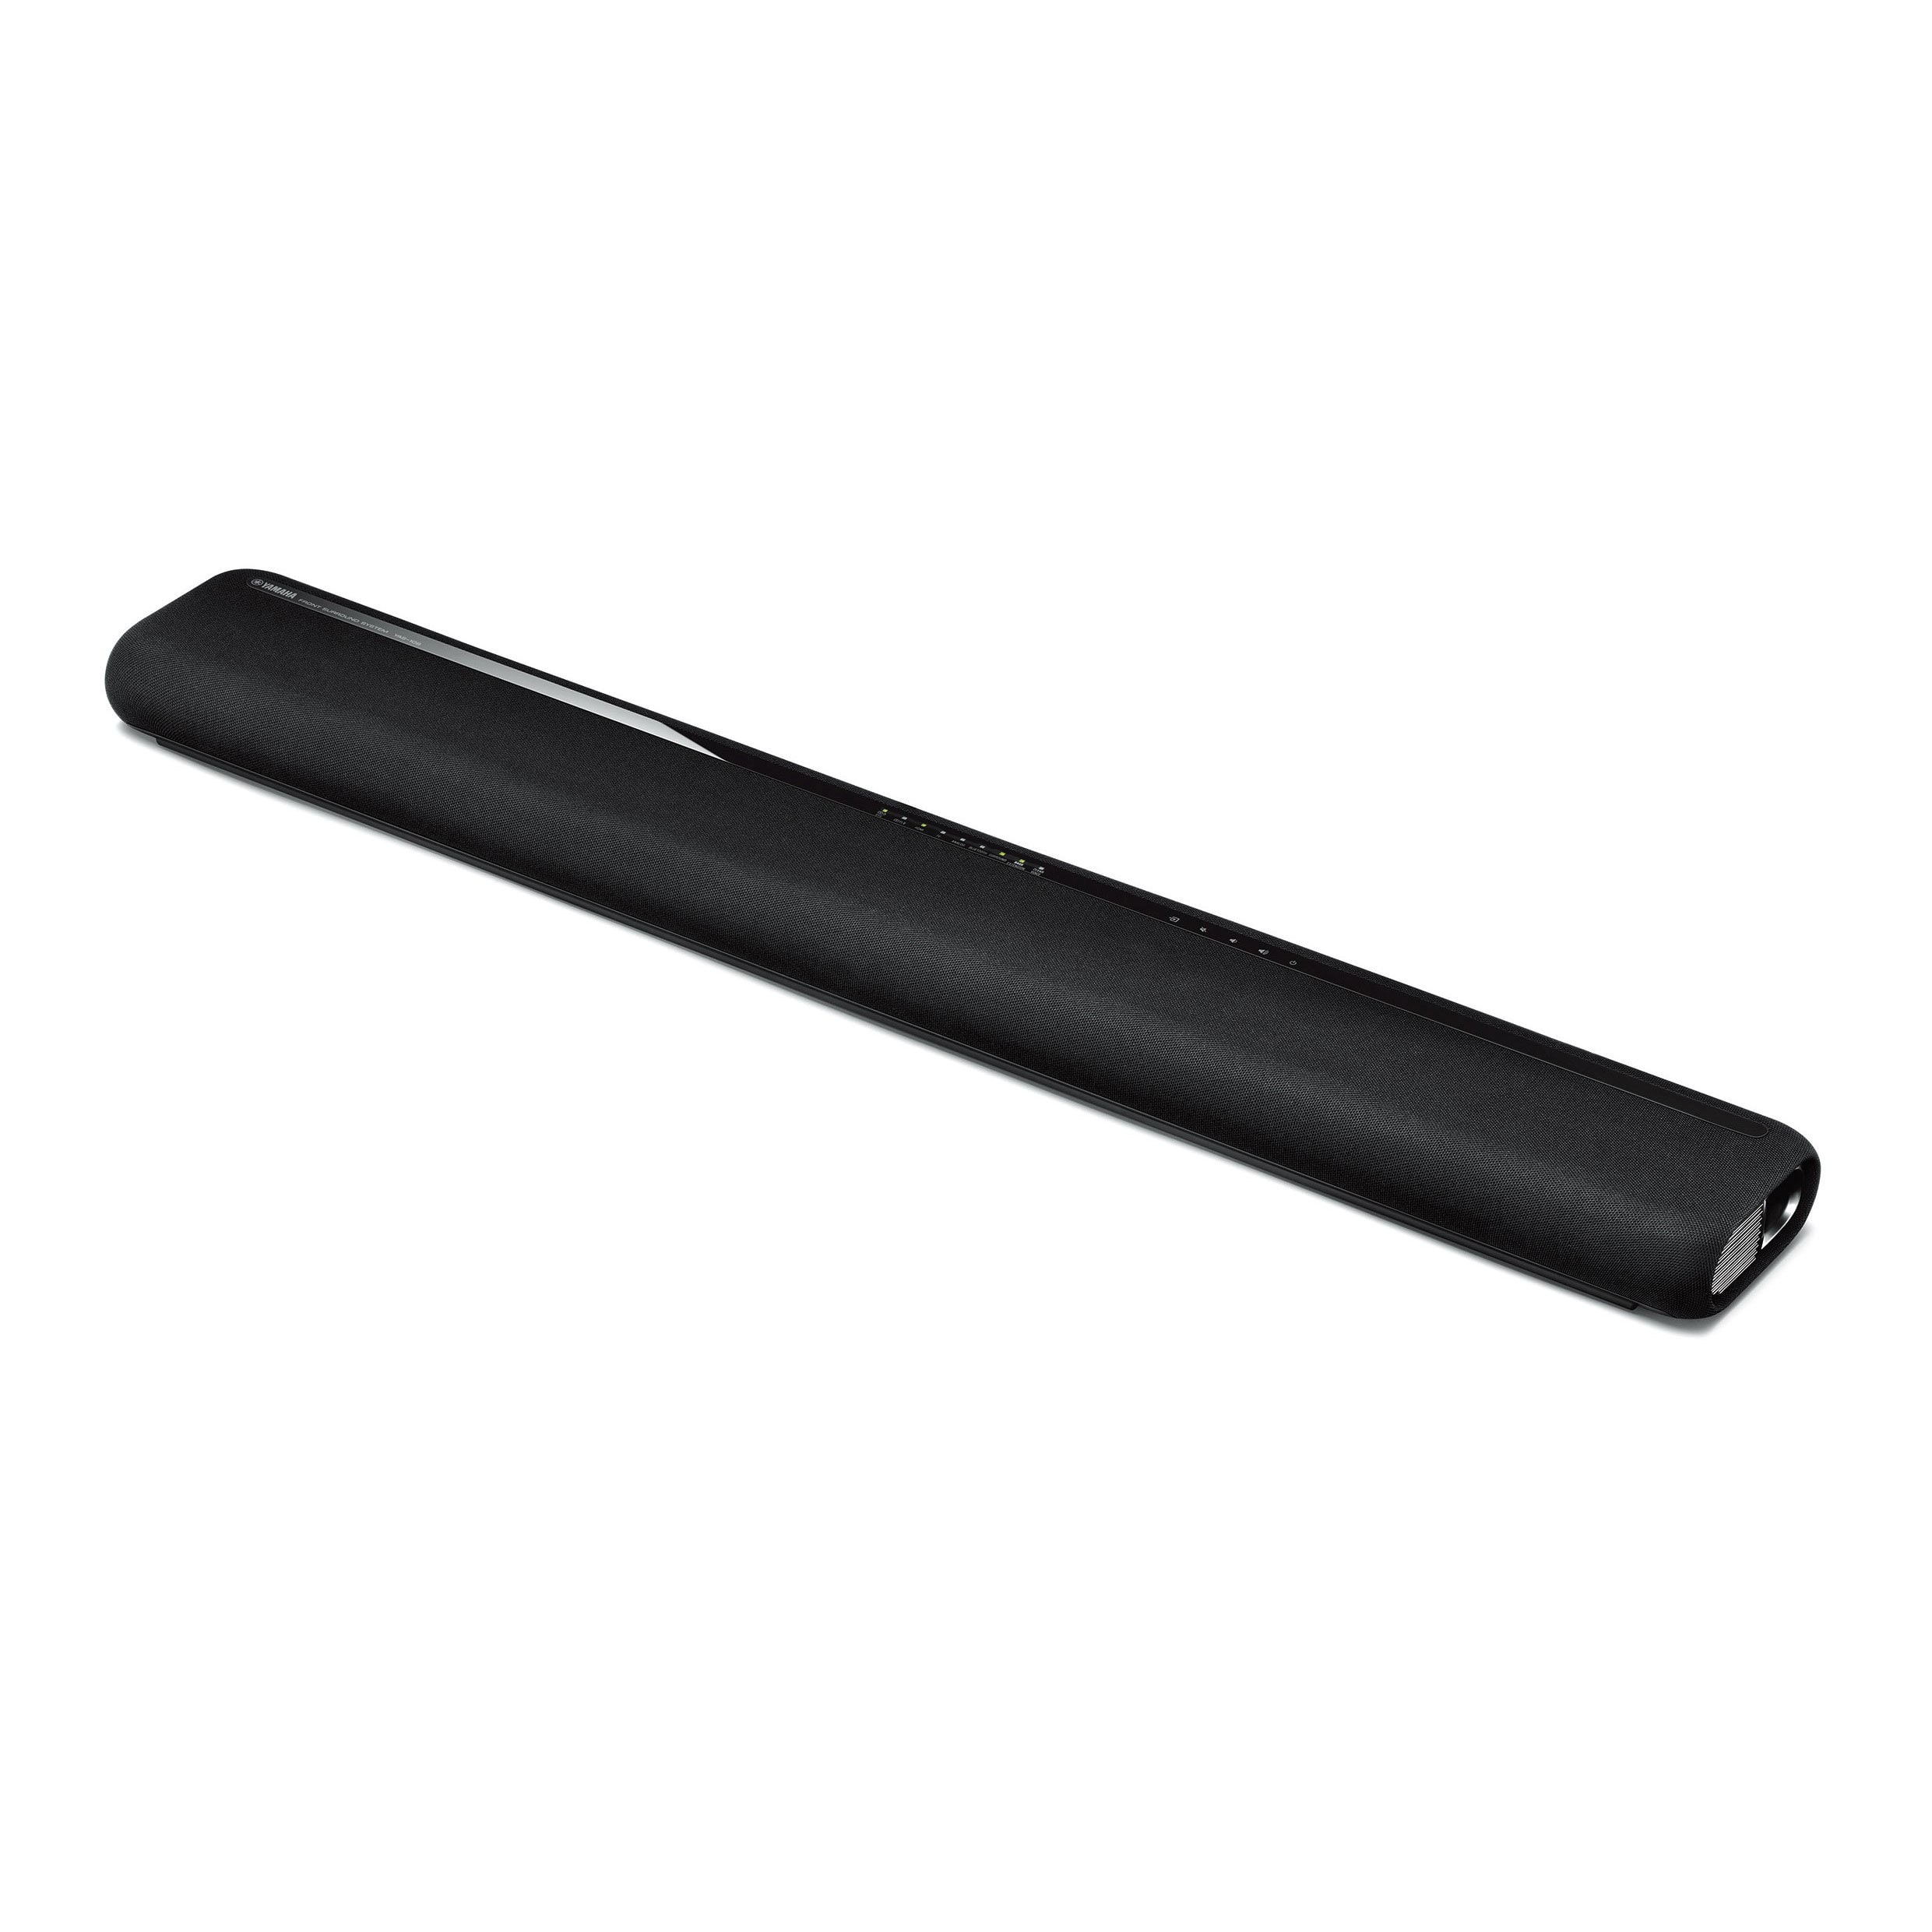 ATS-1060 - Features - Sound Bars - Audio & Visual - Products ...